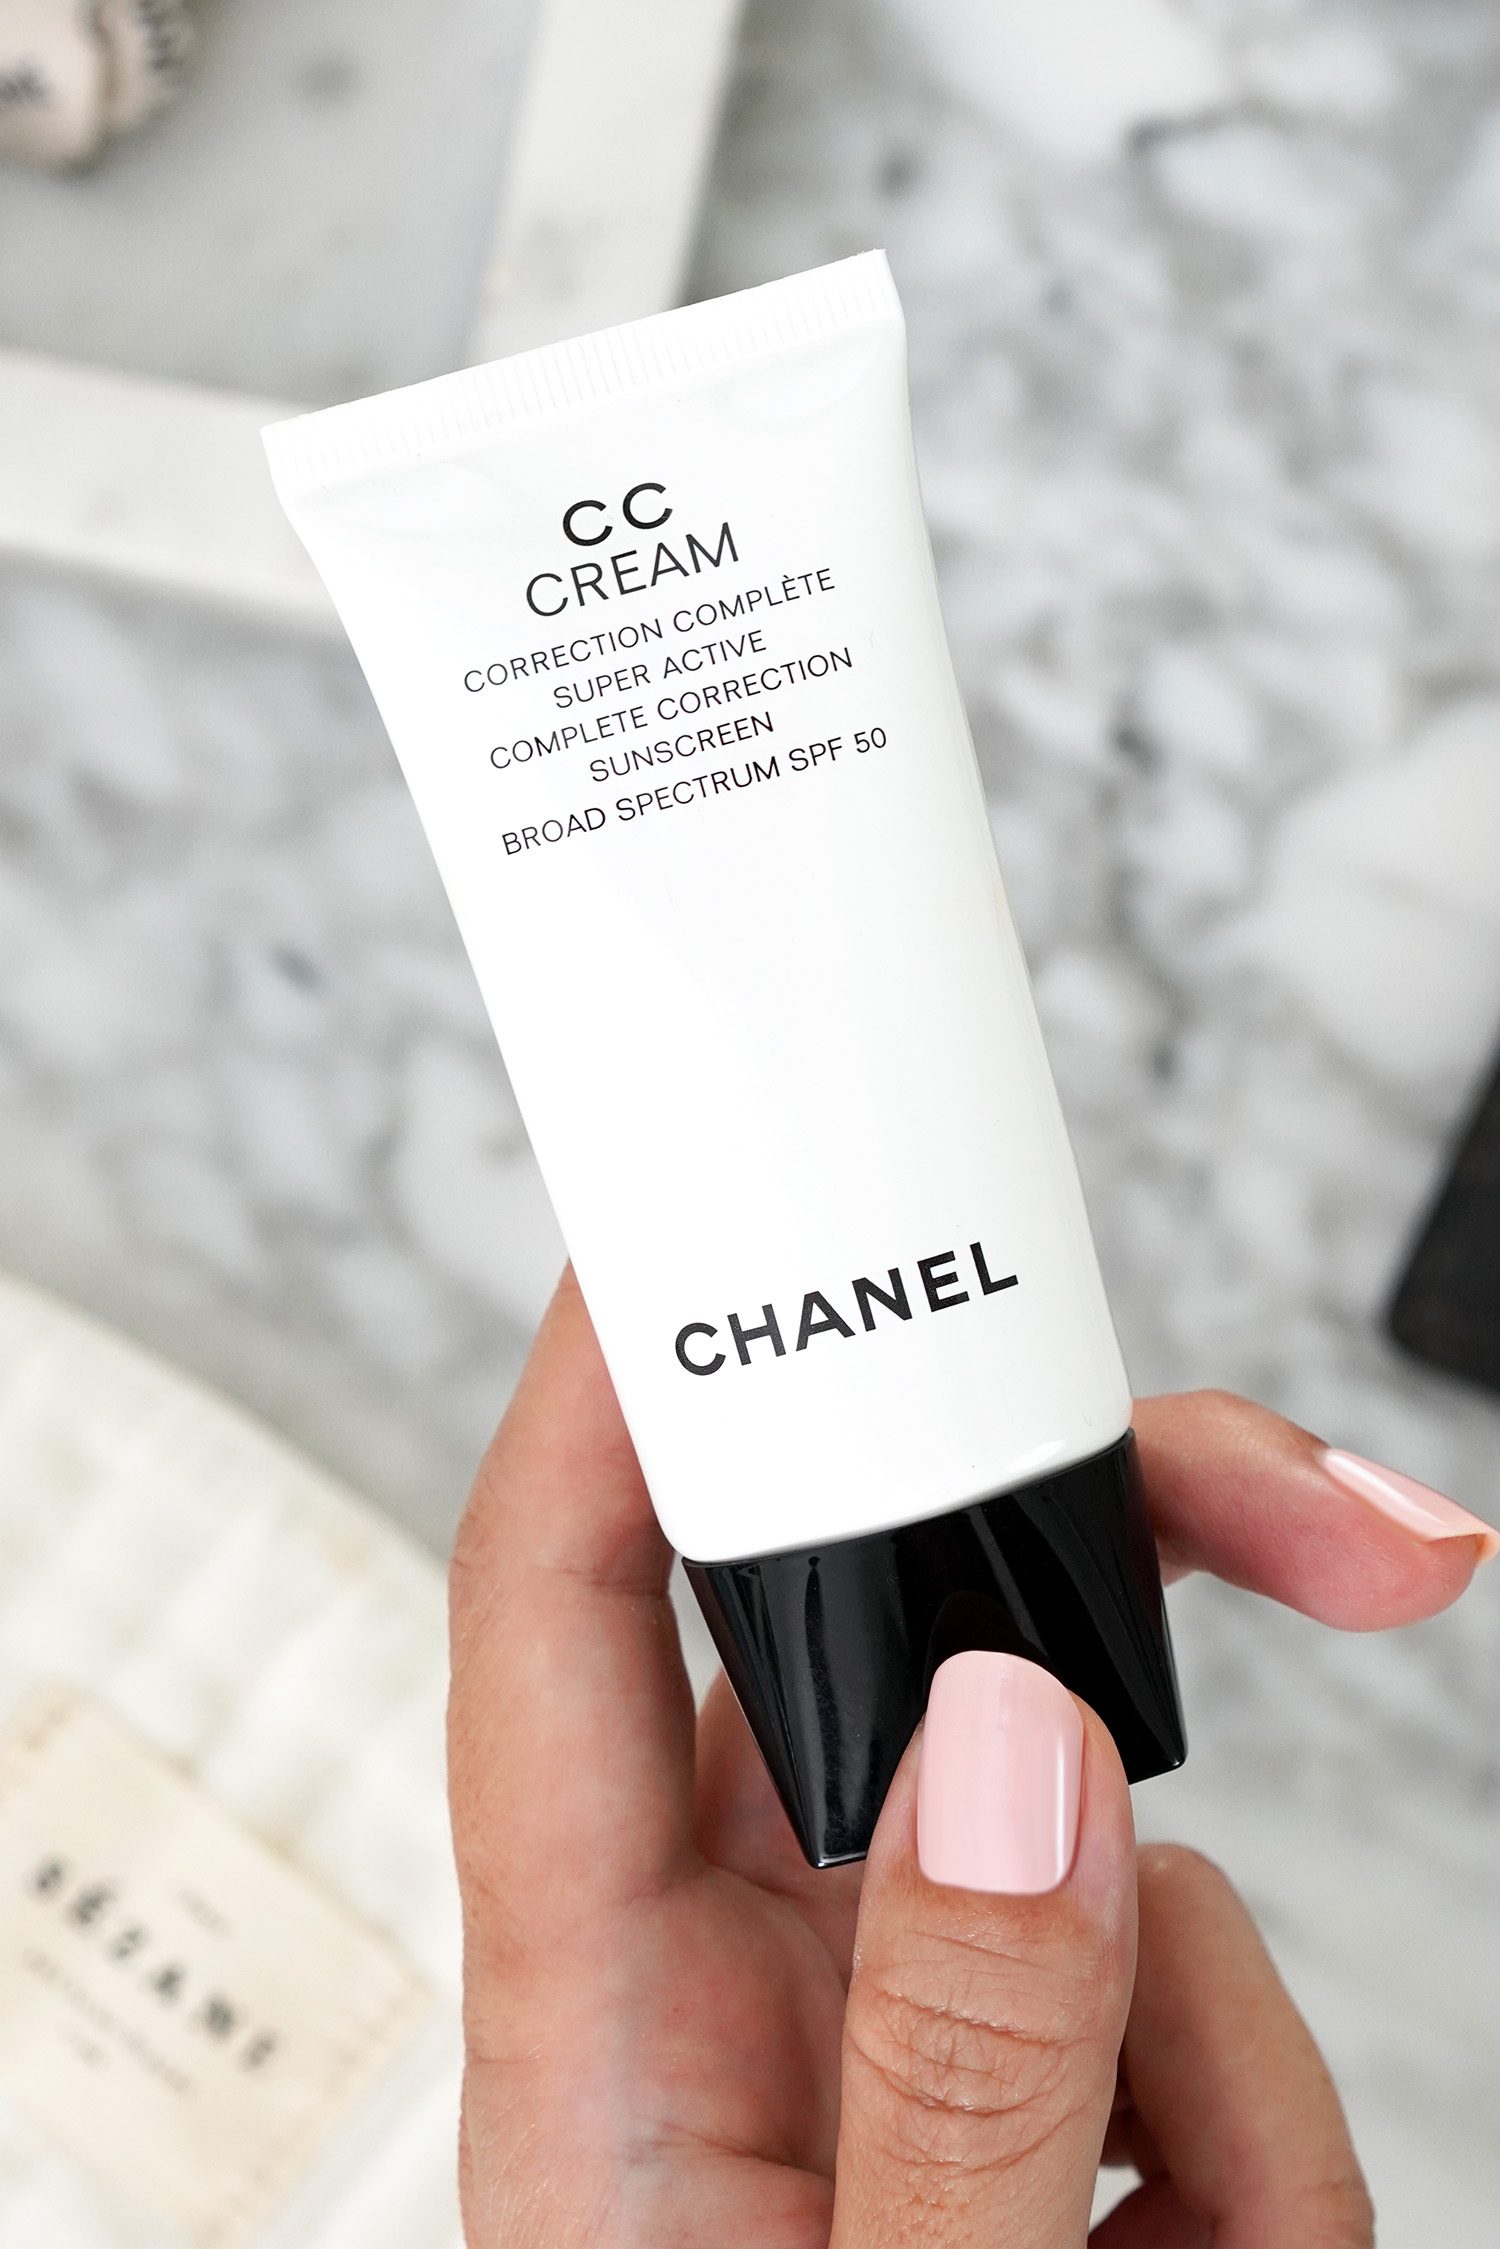 Chanel's New CC Cream Review - Complete Correction Sunscreen Broad